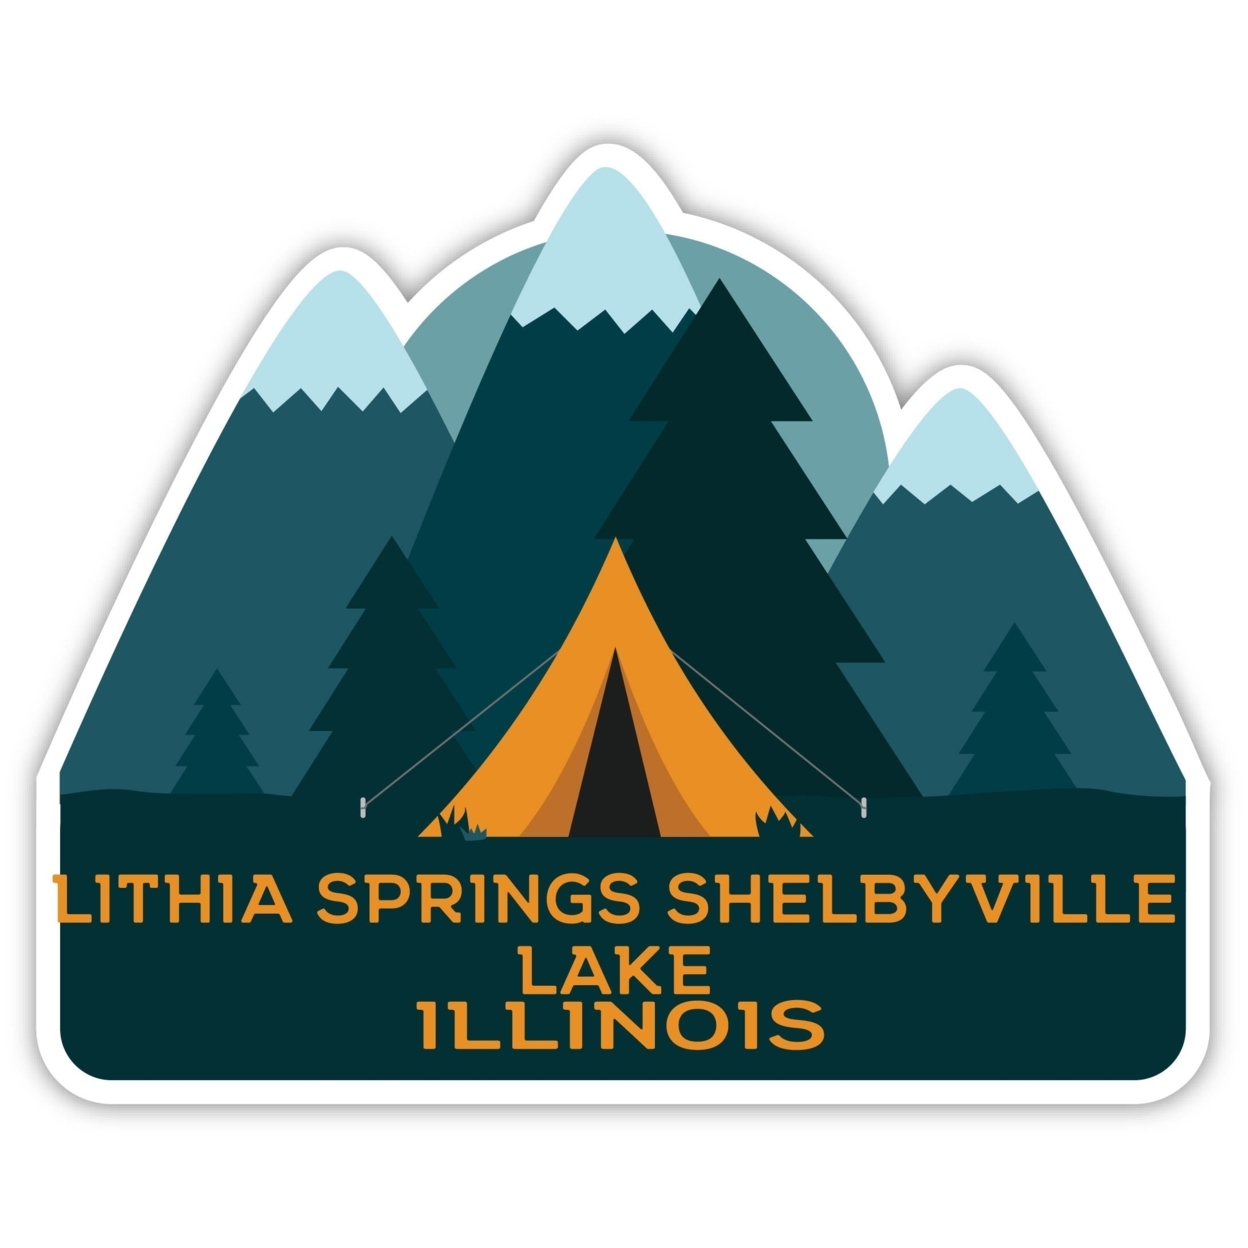 Lithia Springs Shelbyville Lake Illinois Souvenir Decorative Stickers (Choose Theme And Size) - 2-Inch, Tent